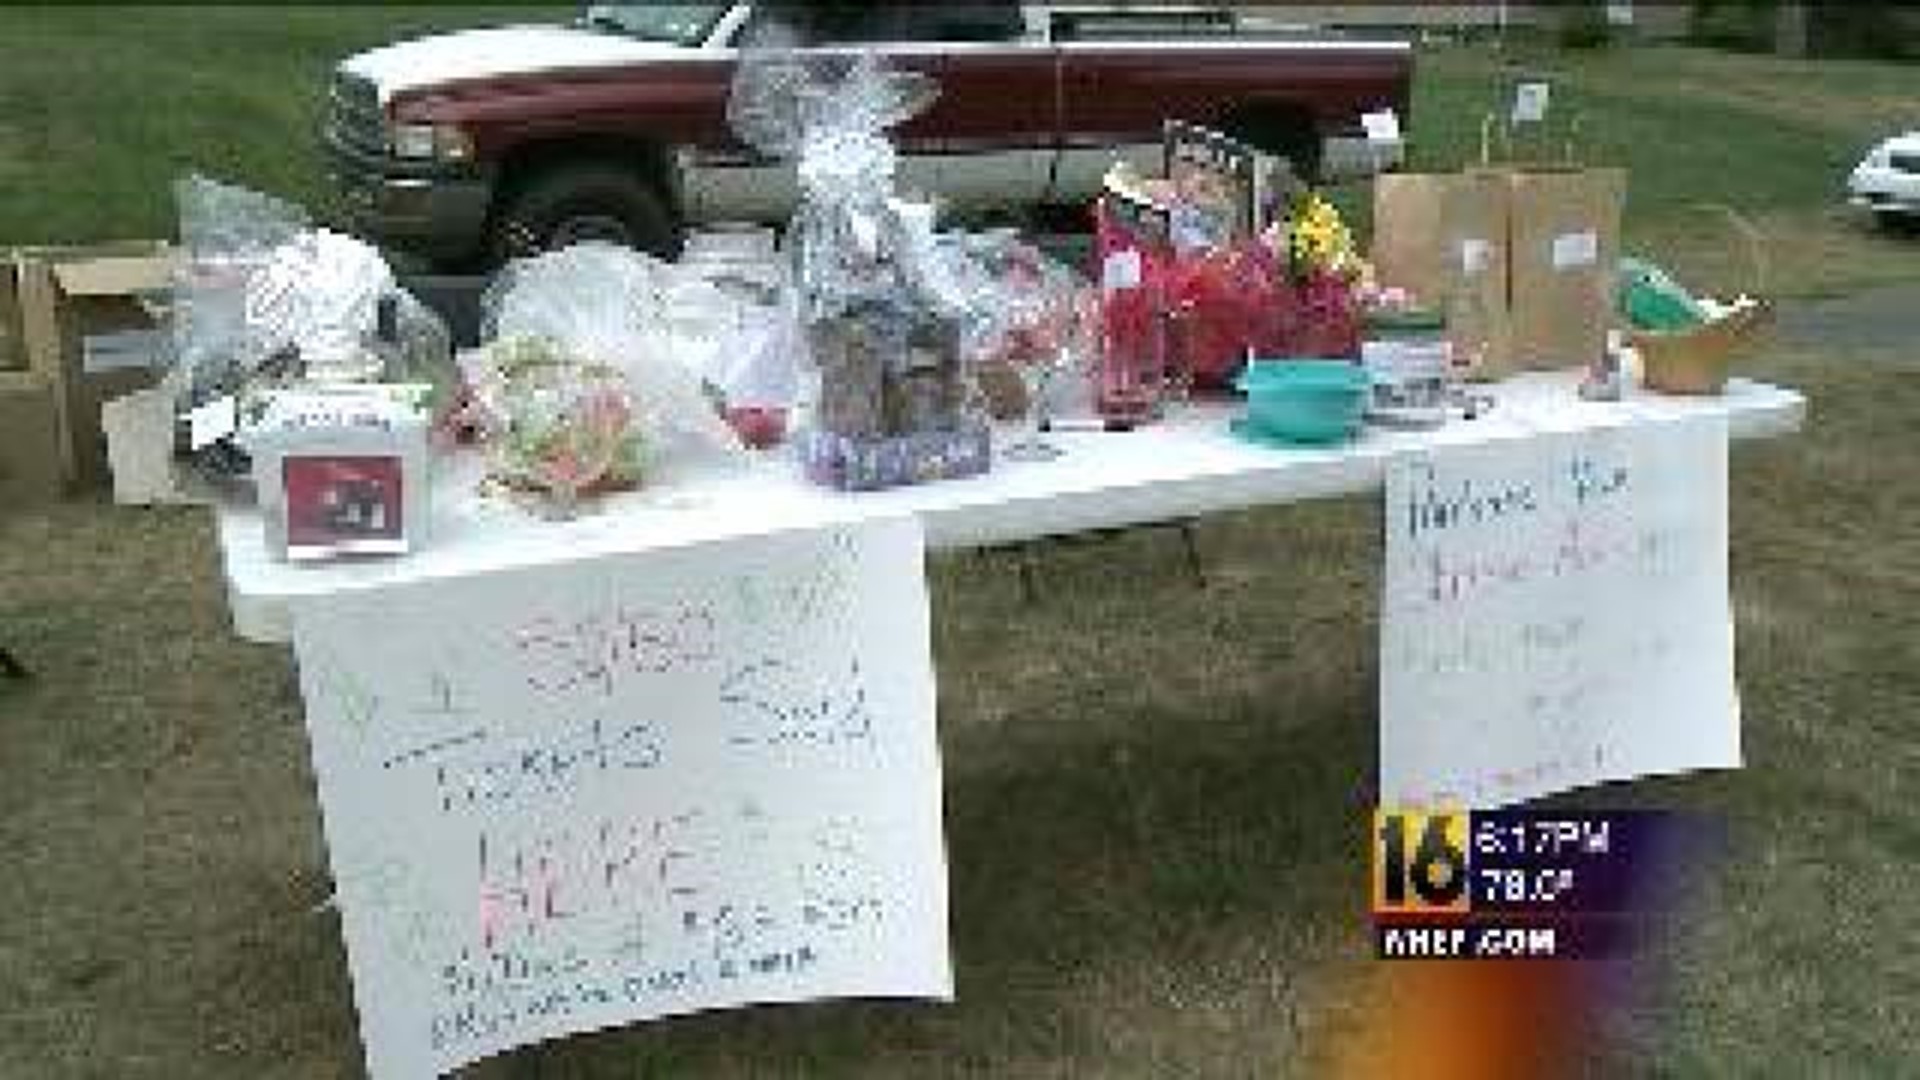 Yard Sale for a Good Cause